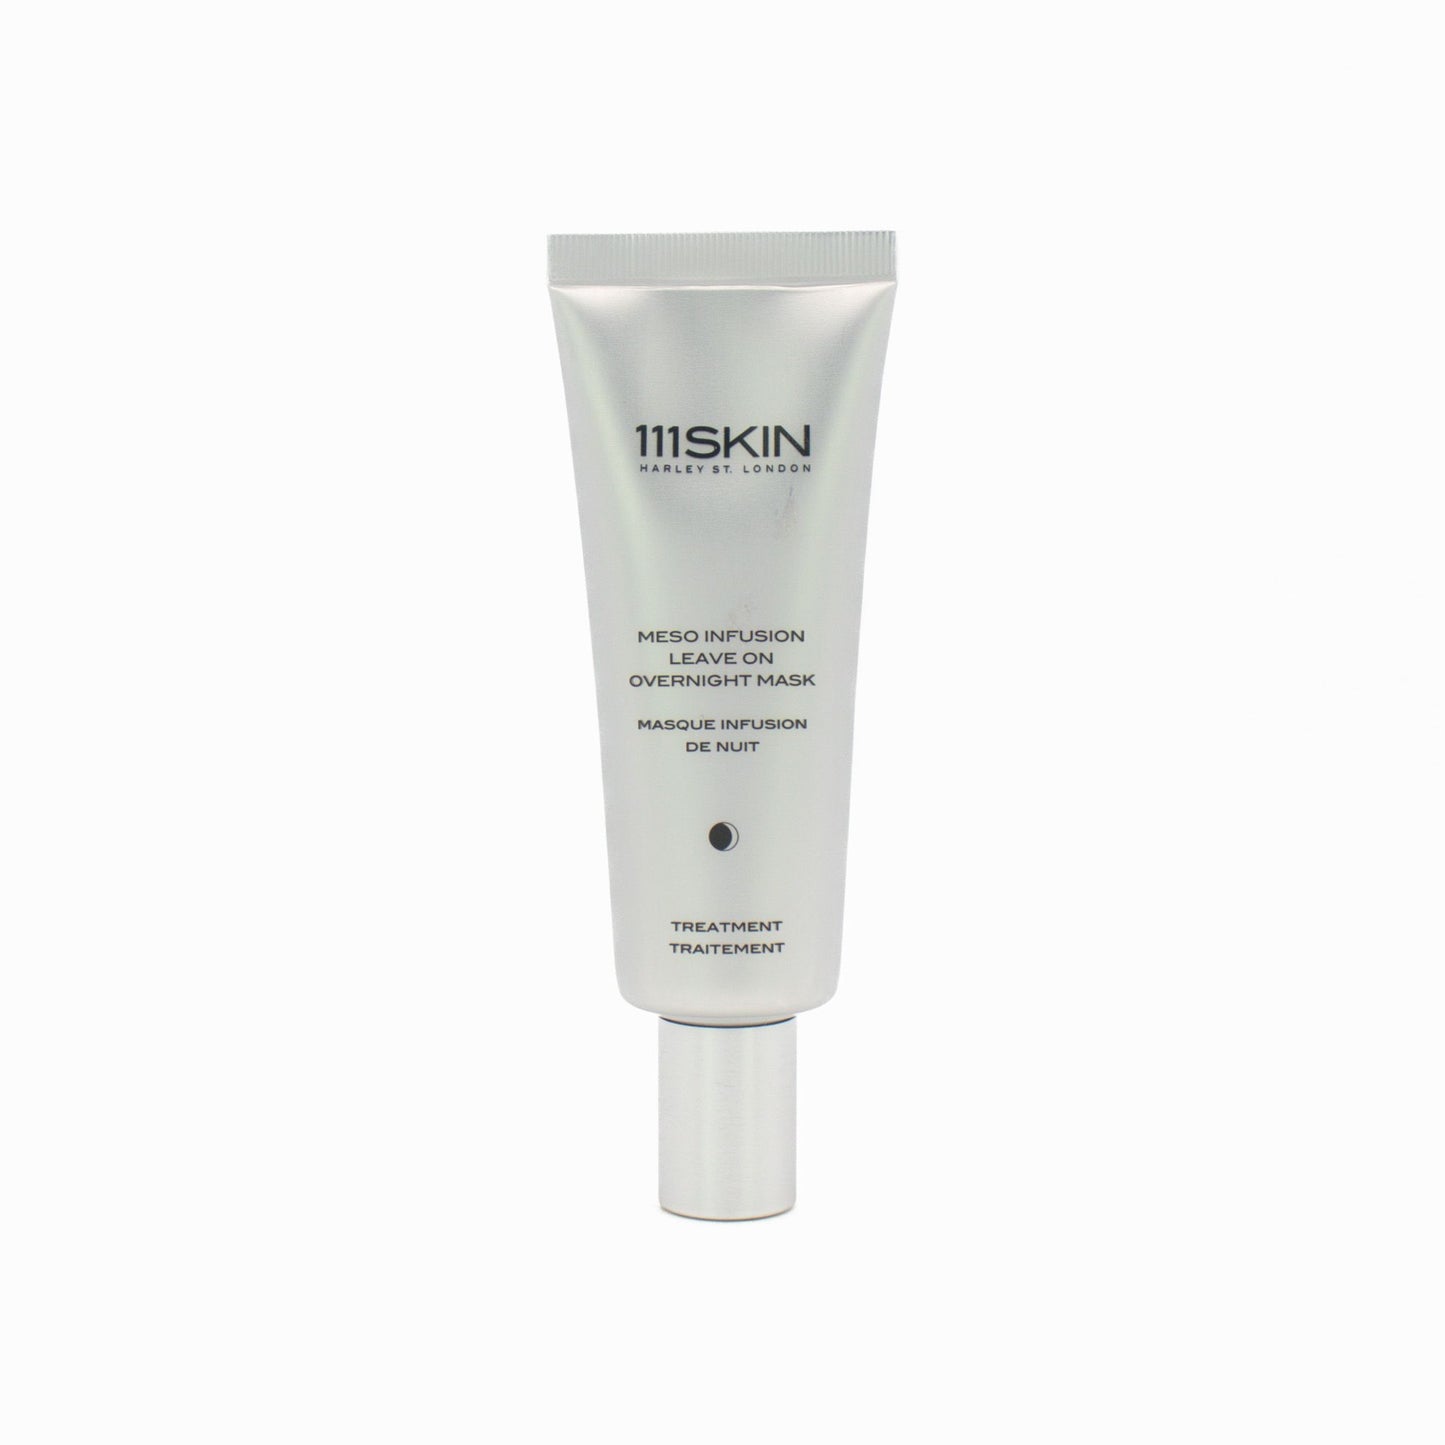 111SKIN Meso Infusion Leave On Overnight Mask 75ml - Imperfect Box - This is Beauty UK